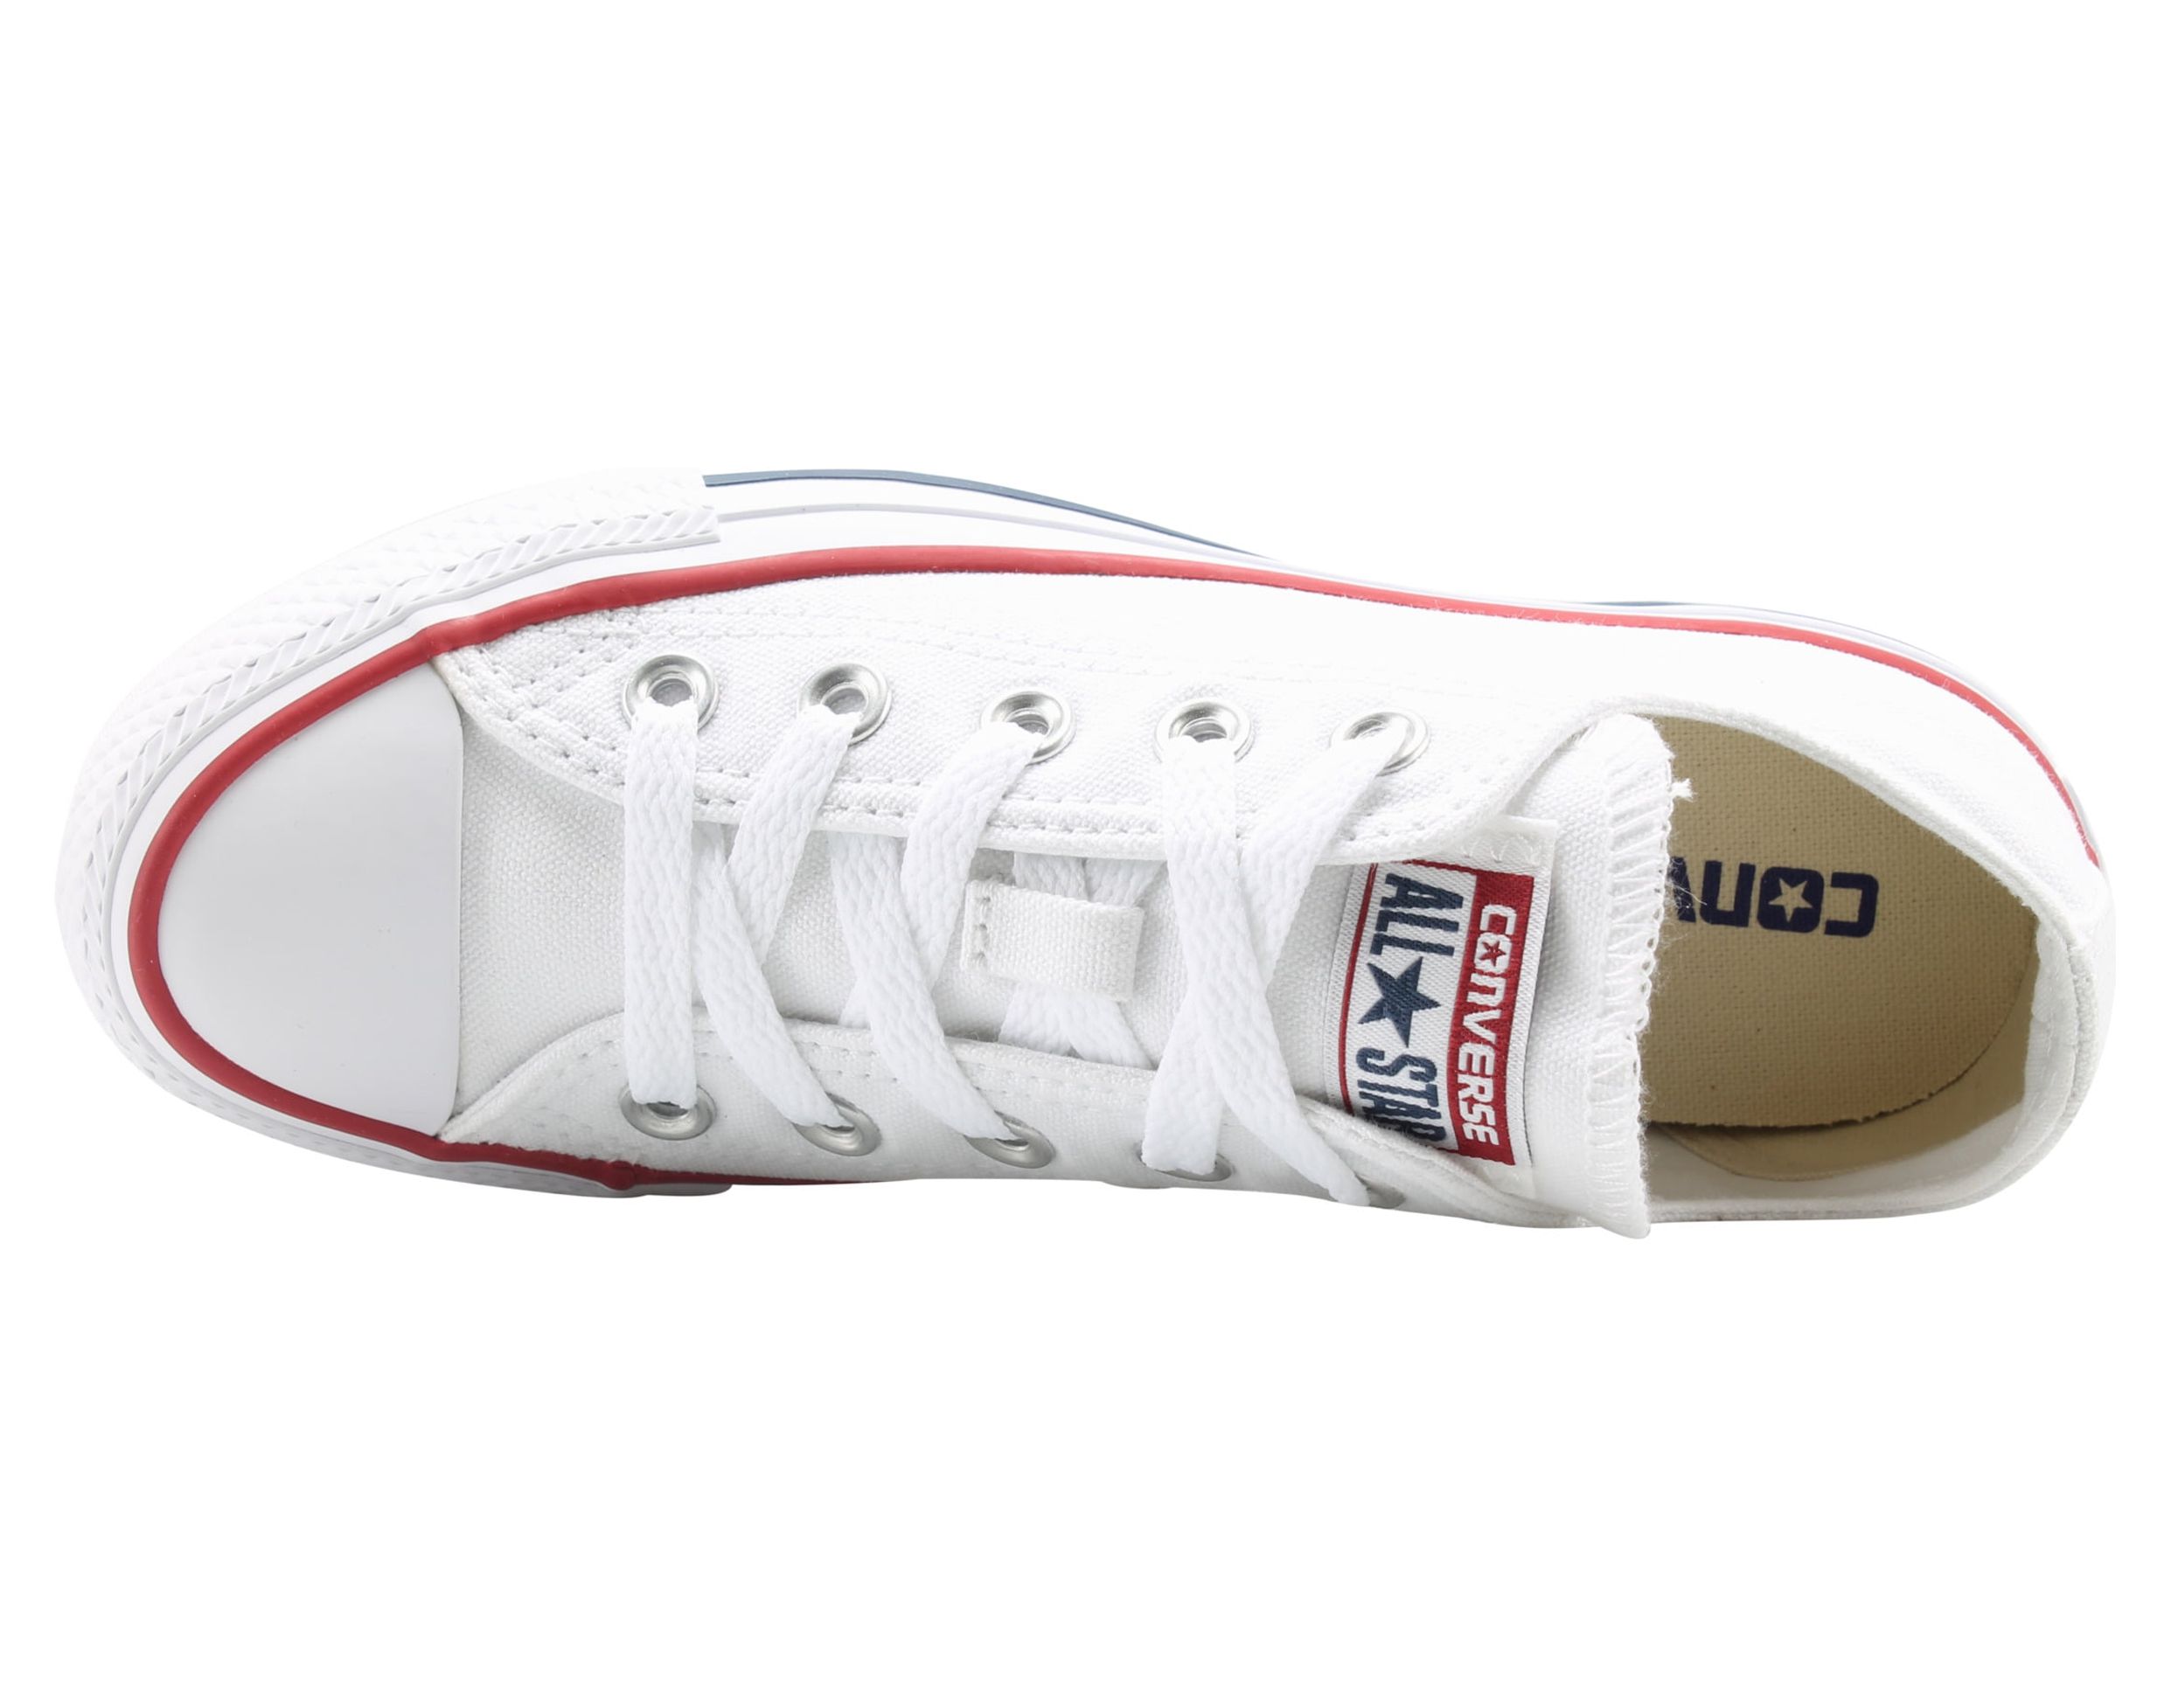 Converse Chuck Taylor All Star Low Sneaker - image 4 of 6